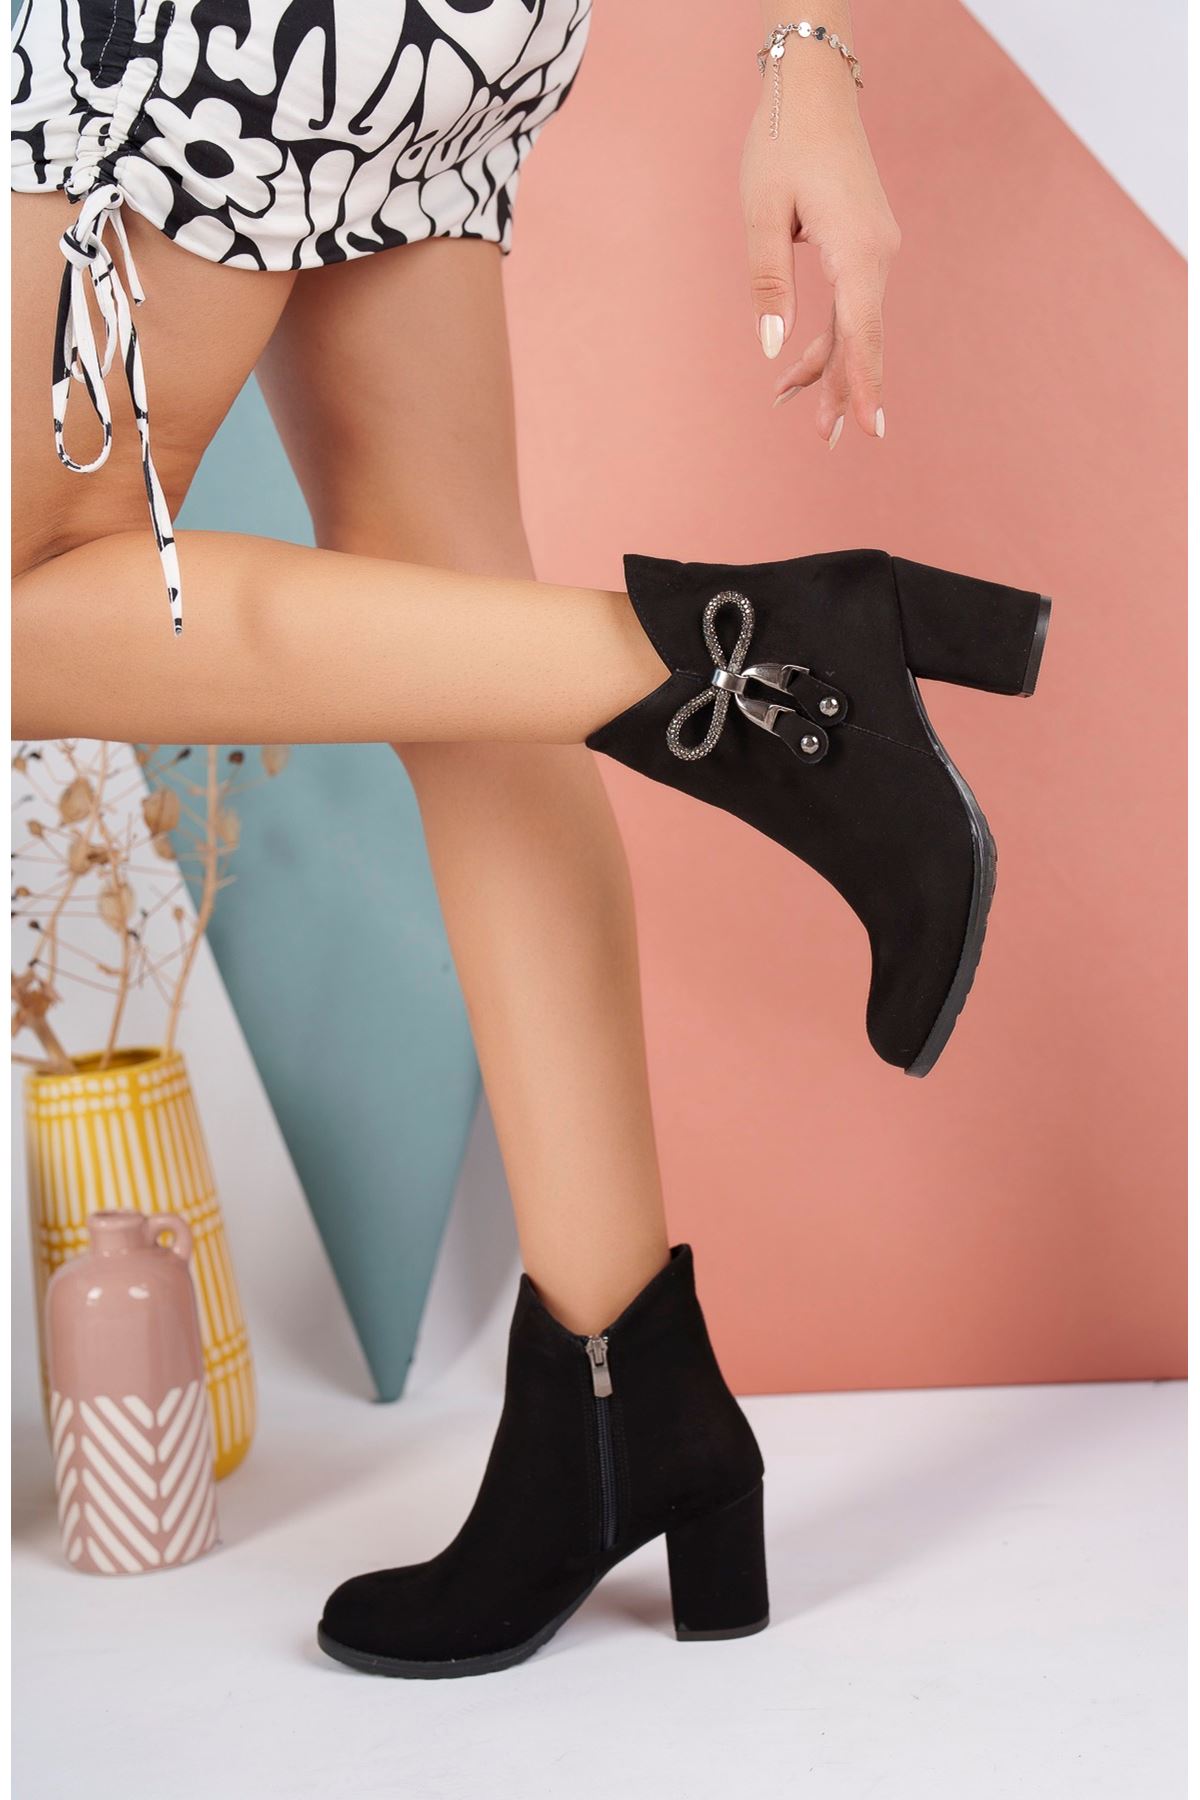 Black Suede Women's Boots with Heeled Side Bow Stone